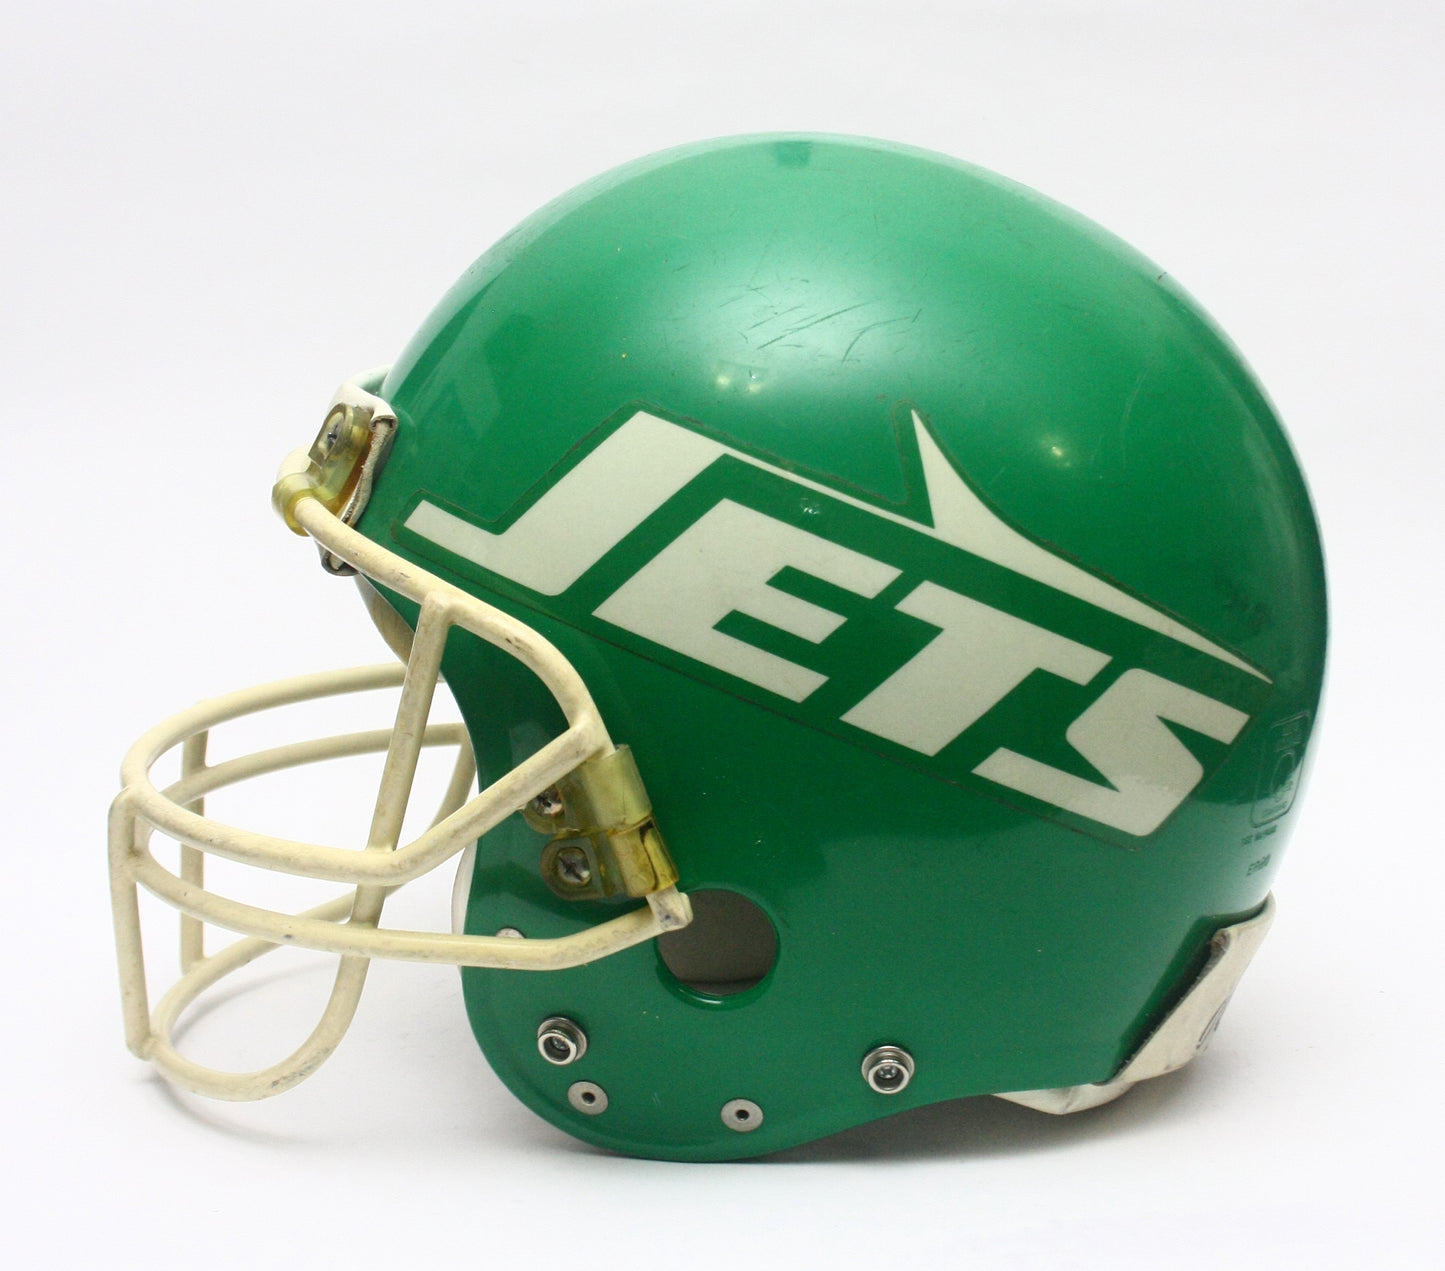 Vintage Game Used 1980s New York Jets Rawlings ANFL Football Helmet Size Large